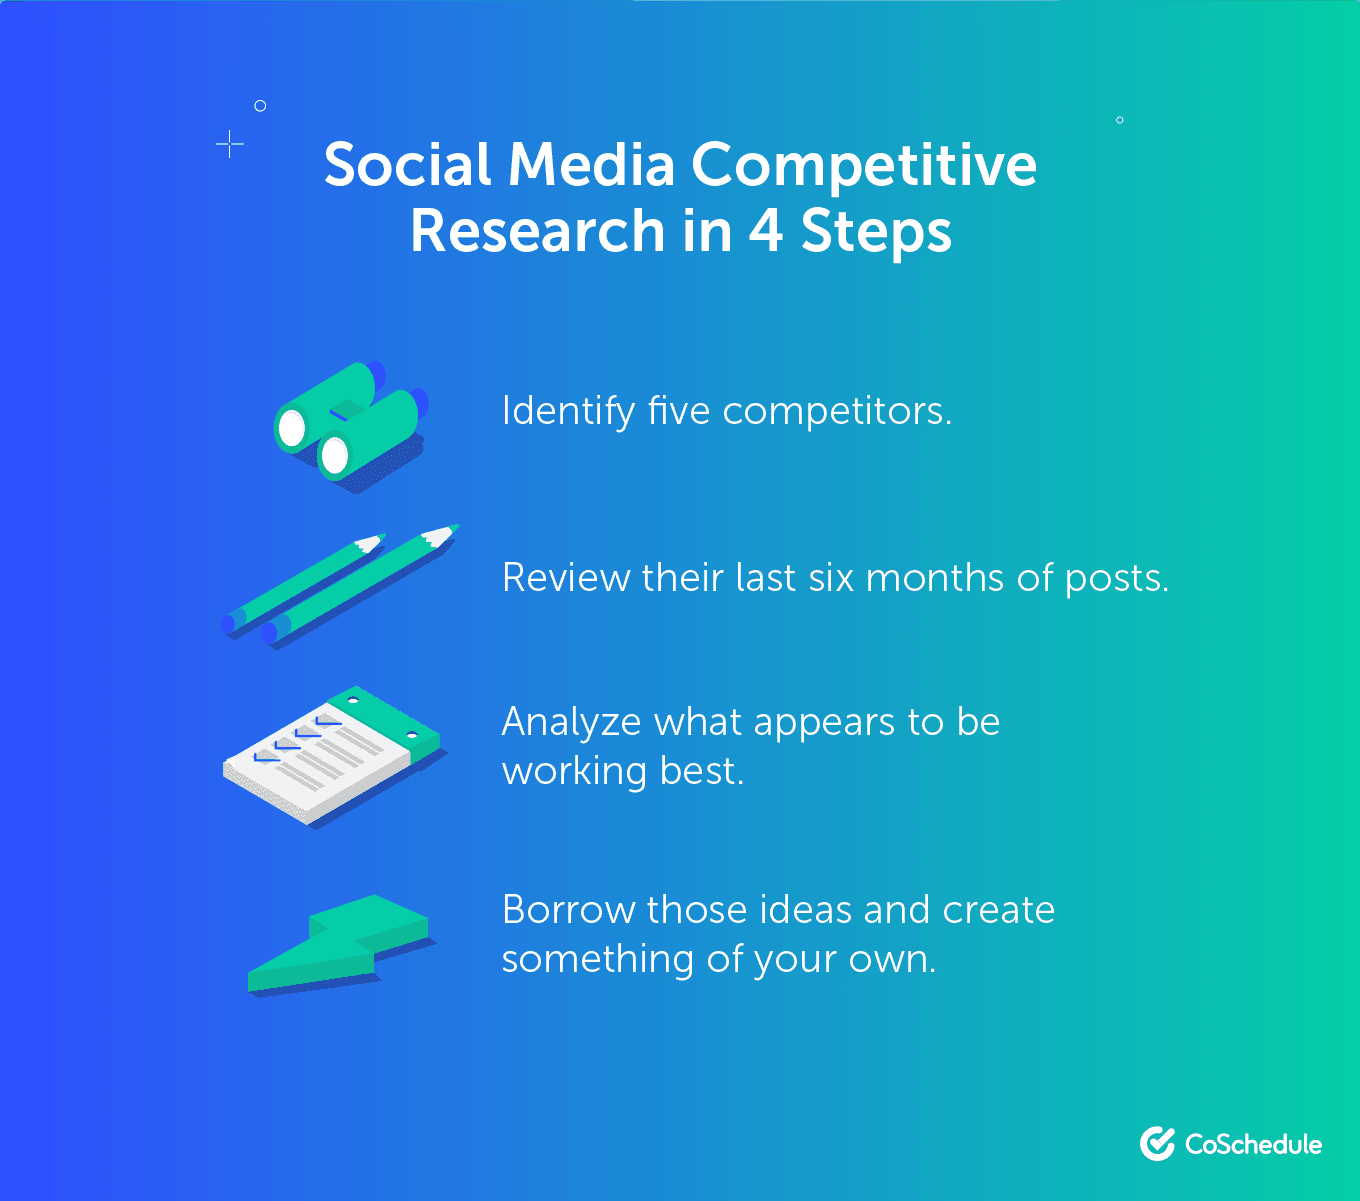 Social Media Competitive Research in 4 Steps